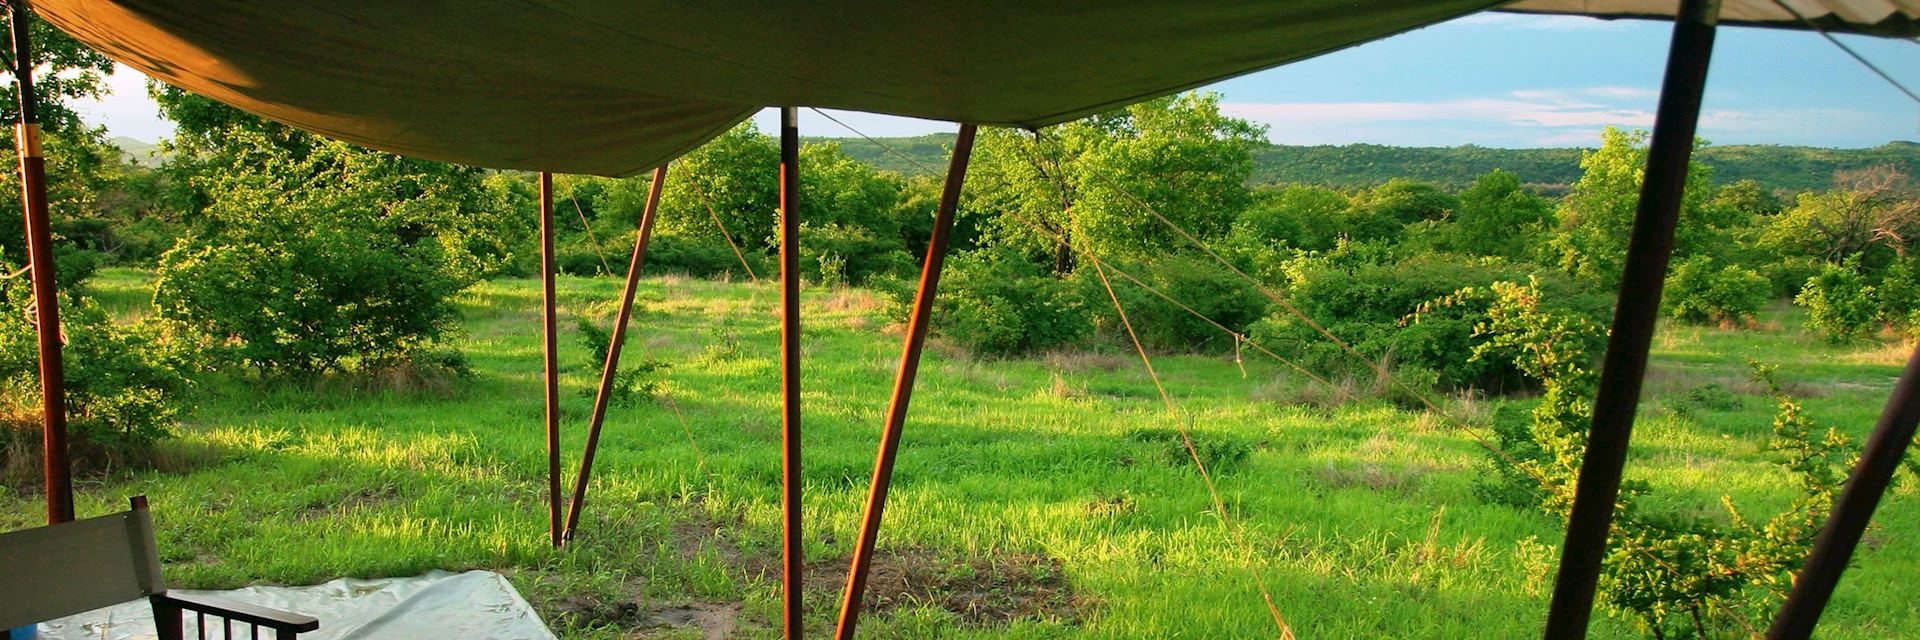 The tented camp of Kwihala in Ruaha National Park